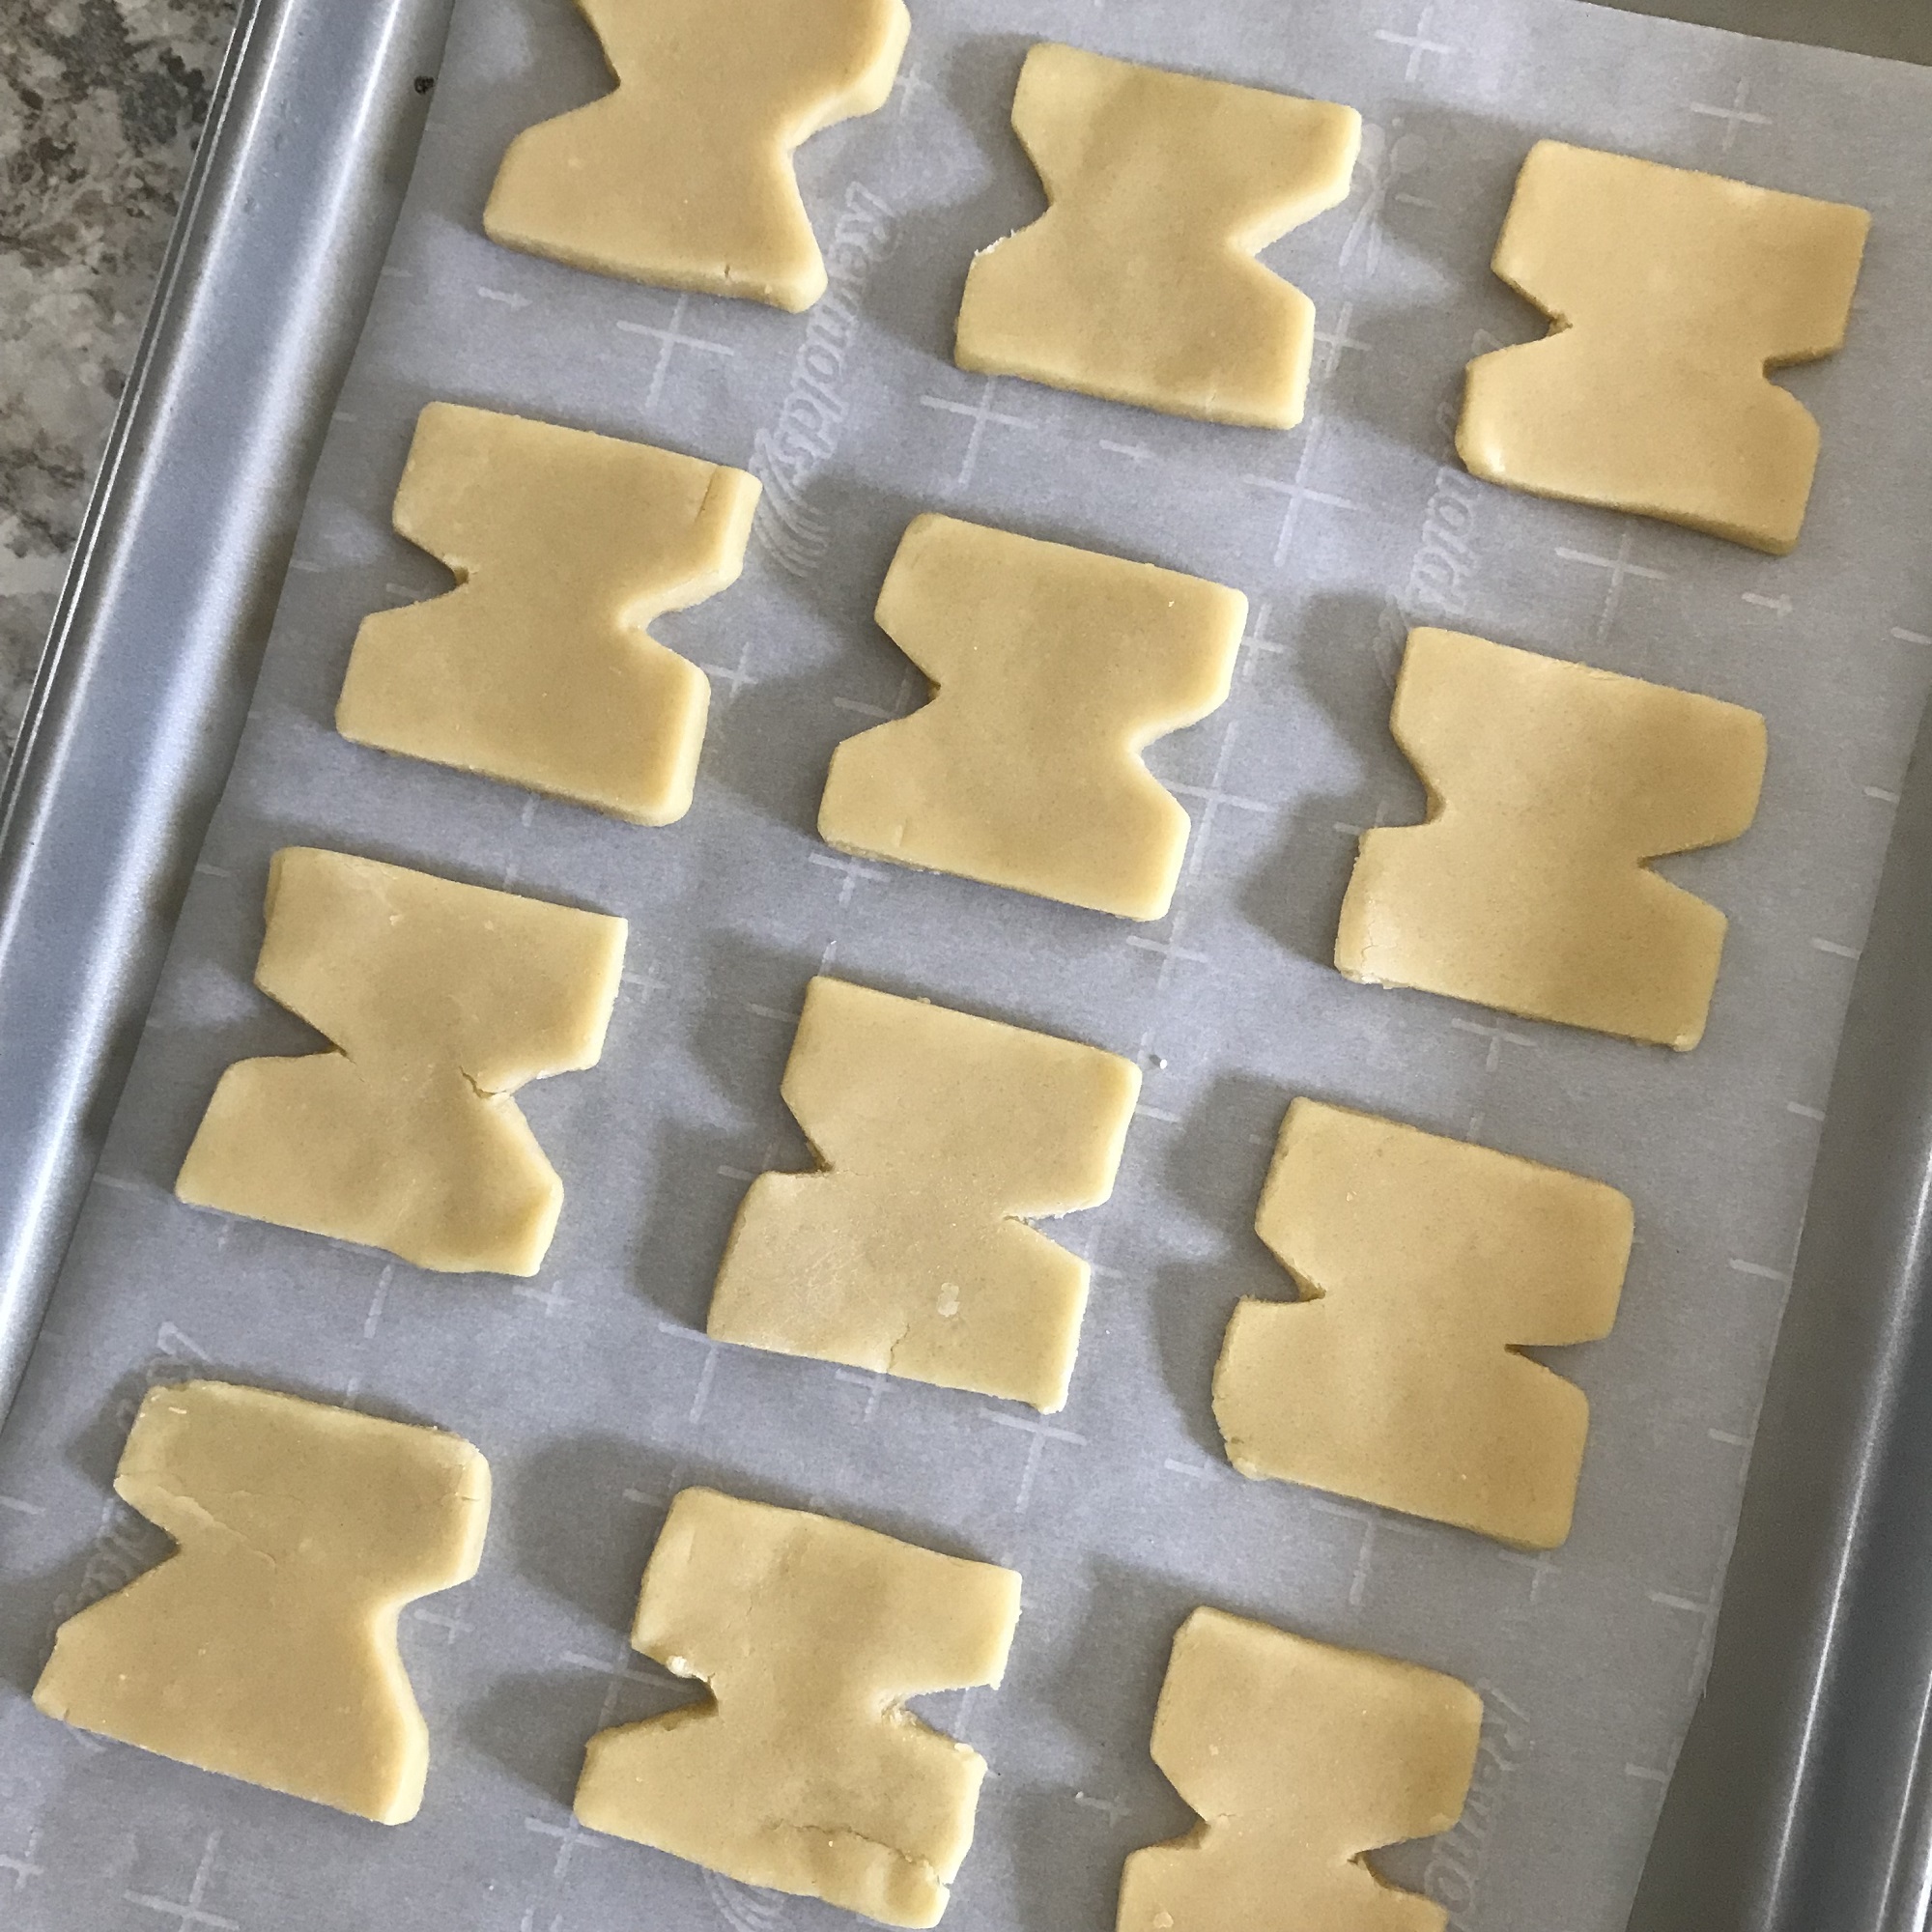 Japor Snippet Cookies Recipe - A Guest Post by Popcorner Reviews | Anakin and His Angel